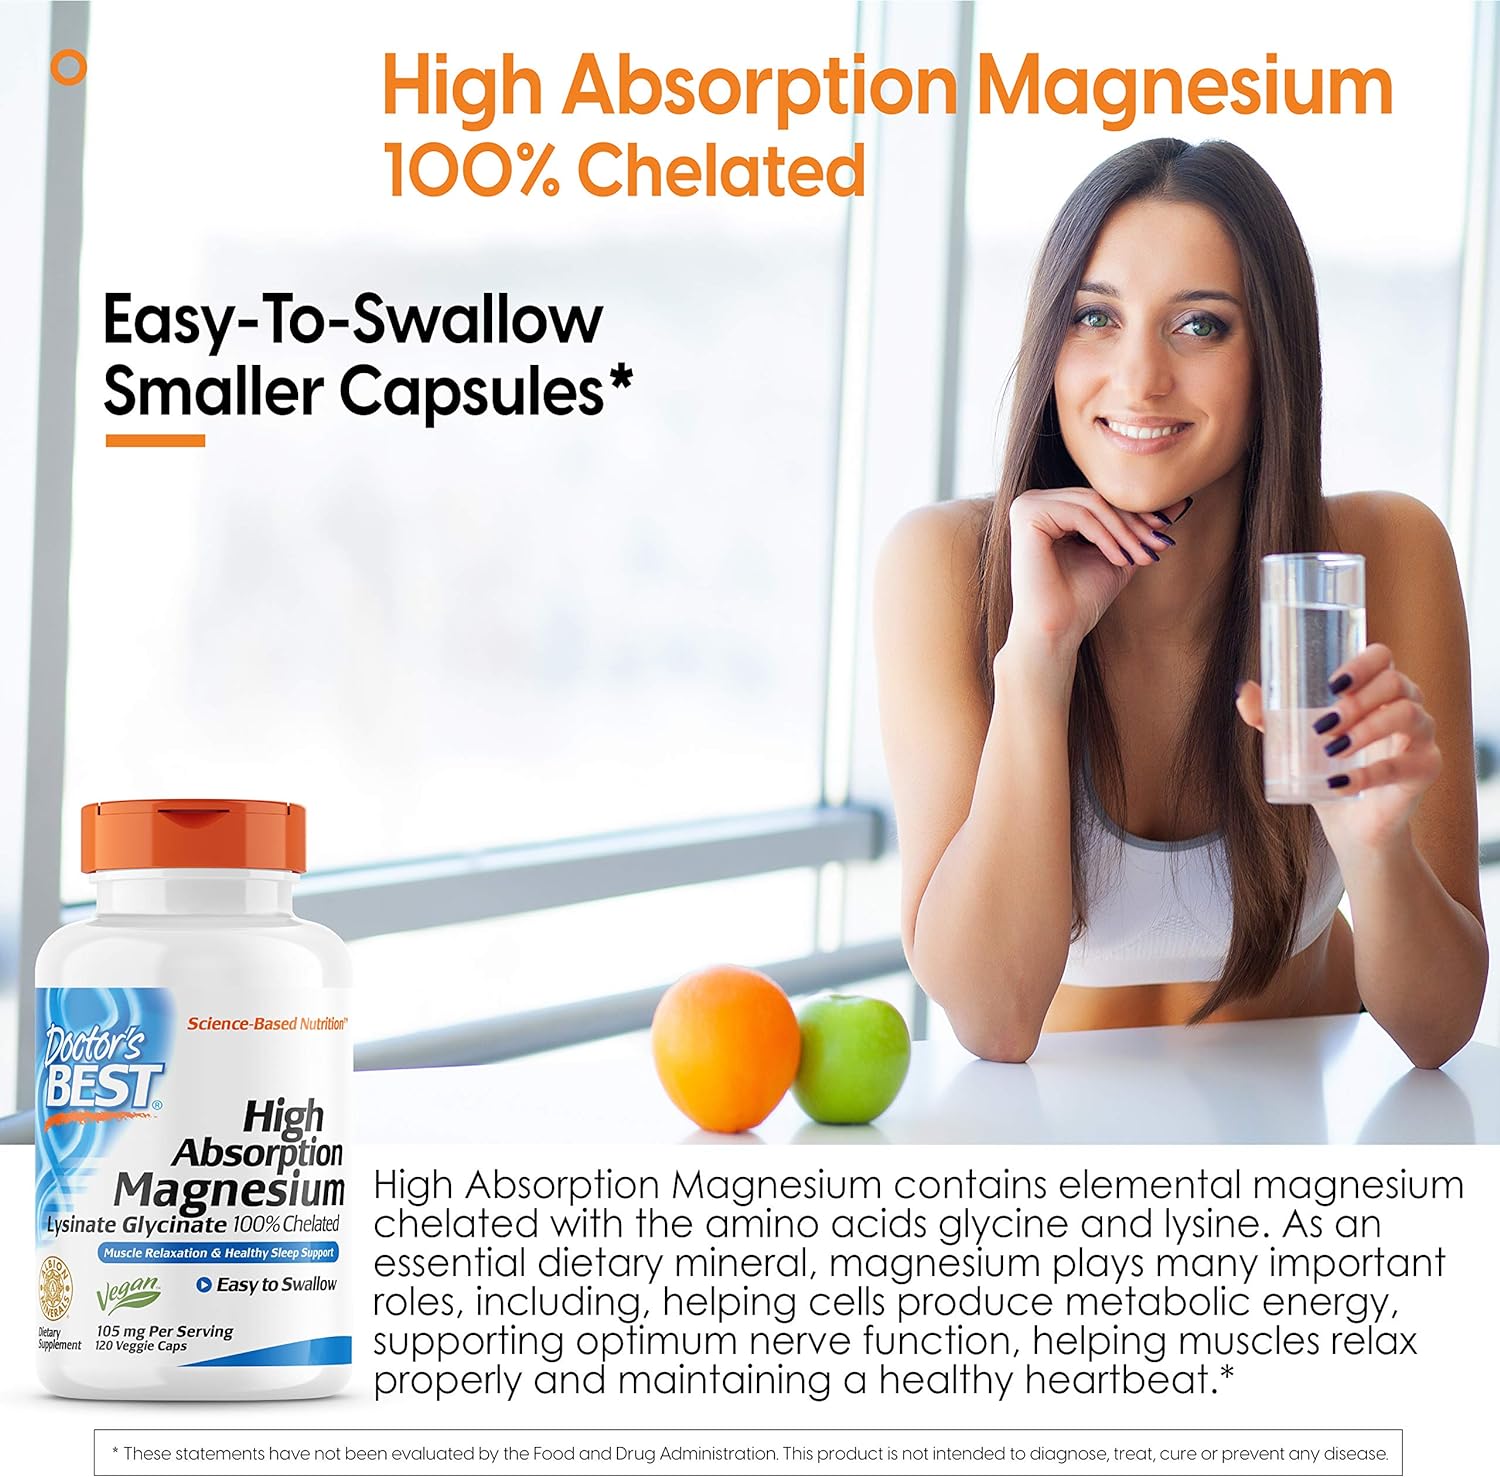  Doctors Best High Absorption Magnesium Lysinate Glycinate, Easy to Swallow, 120 Ct